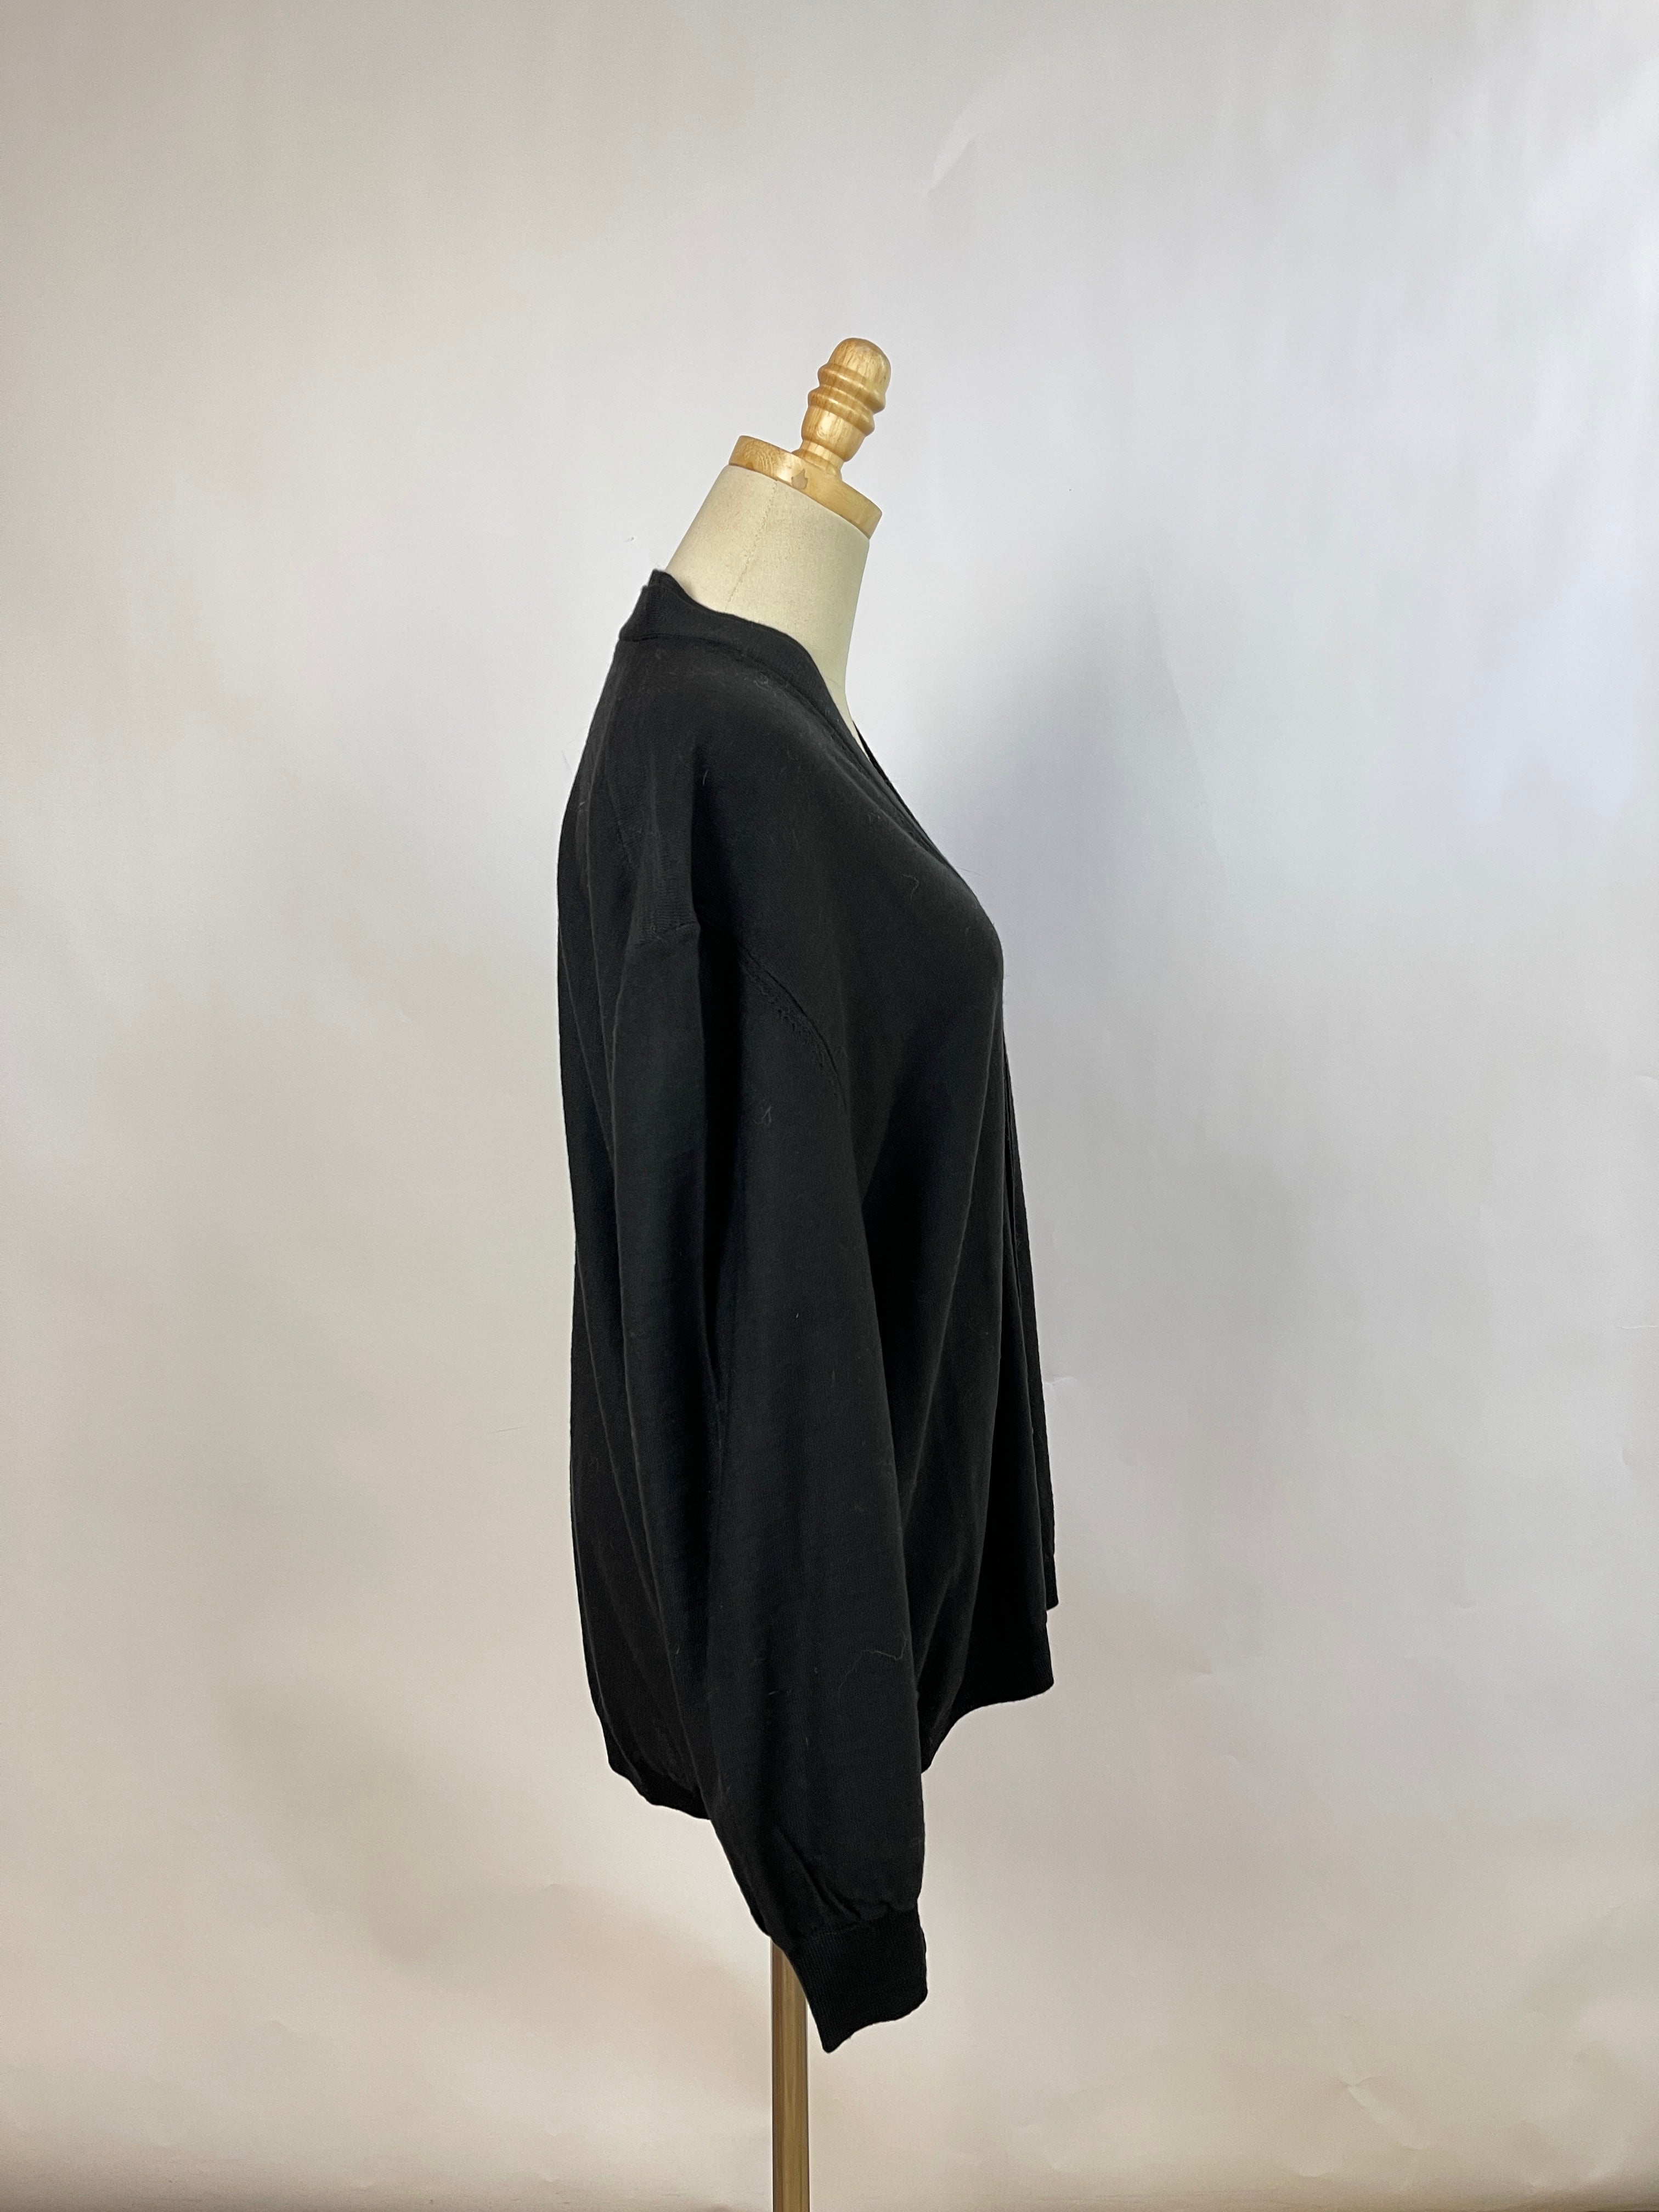 Lemaire Black Twisted Cardigan (XL)